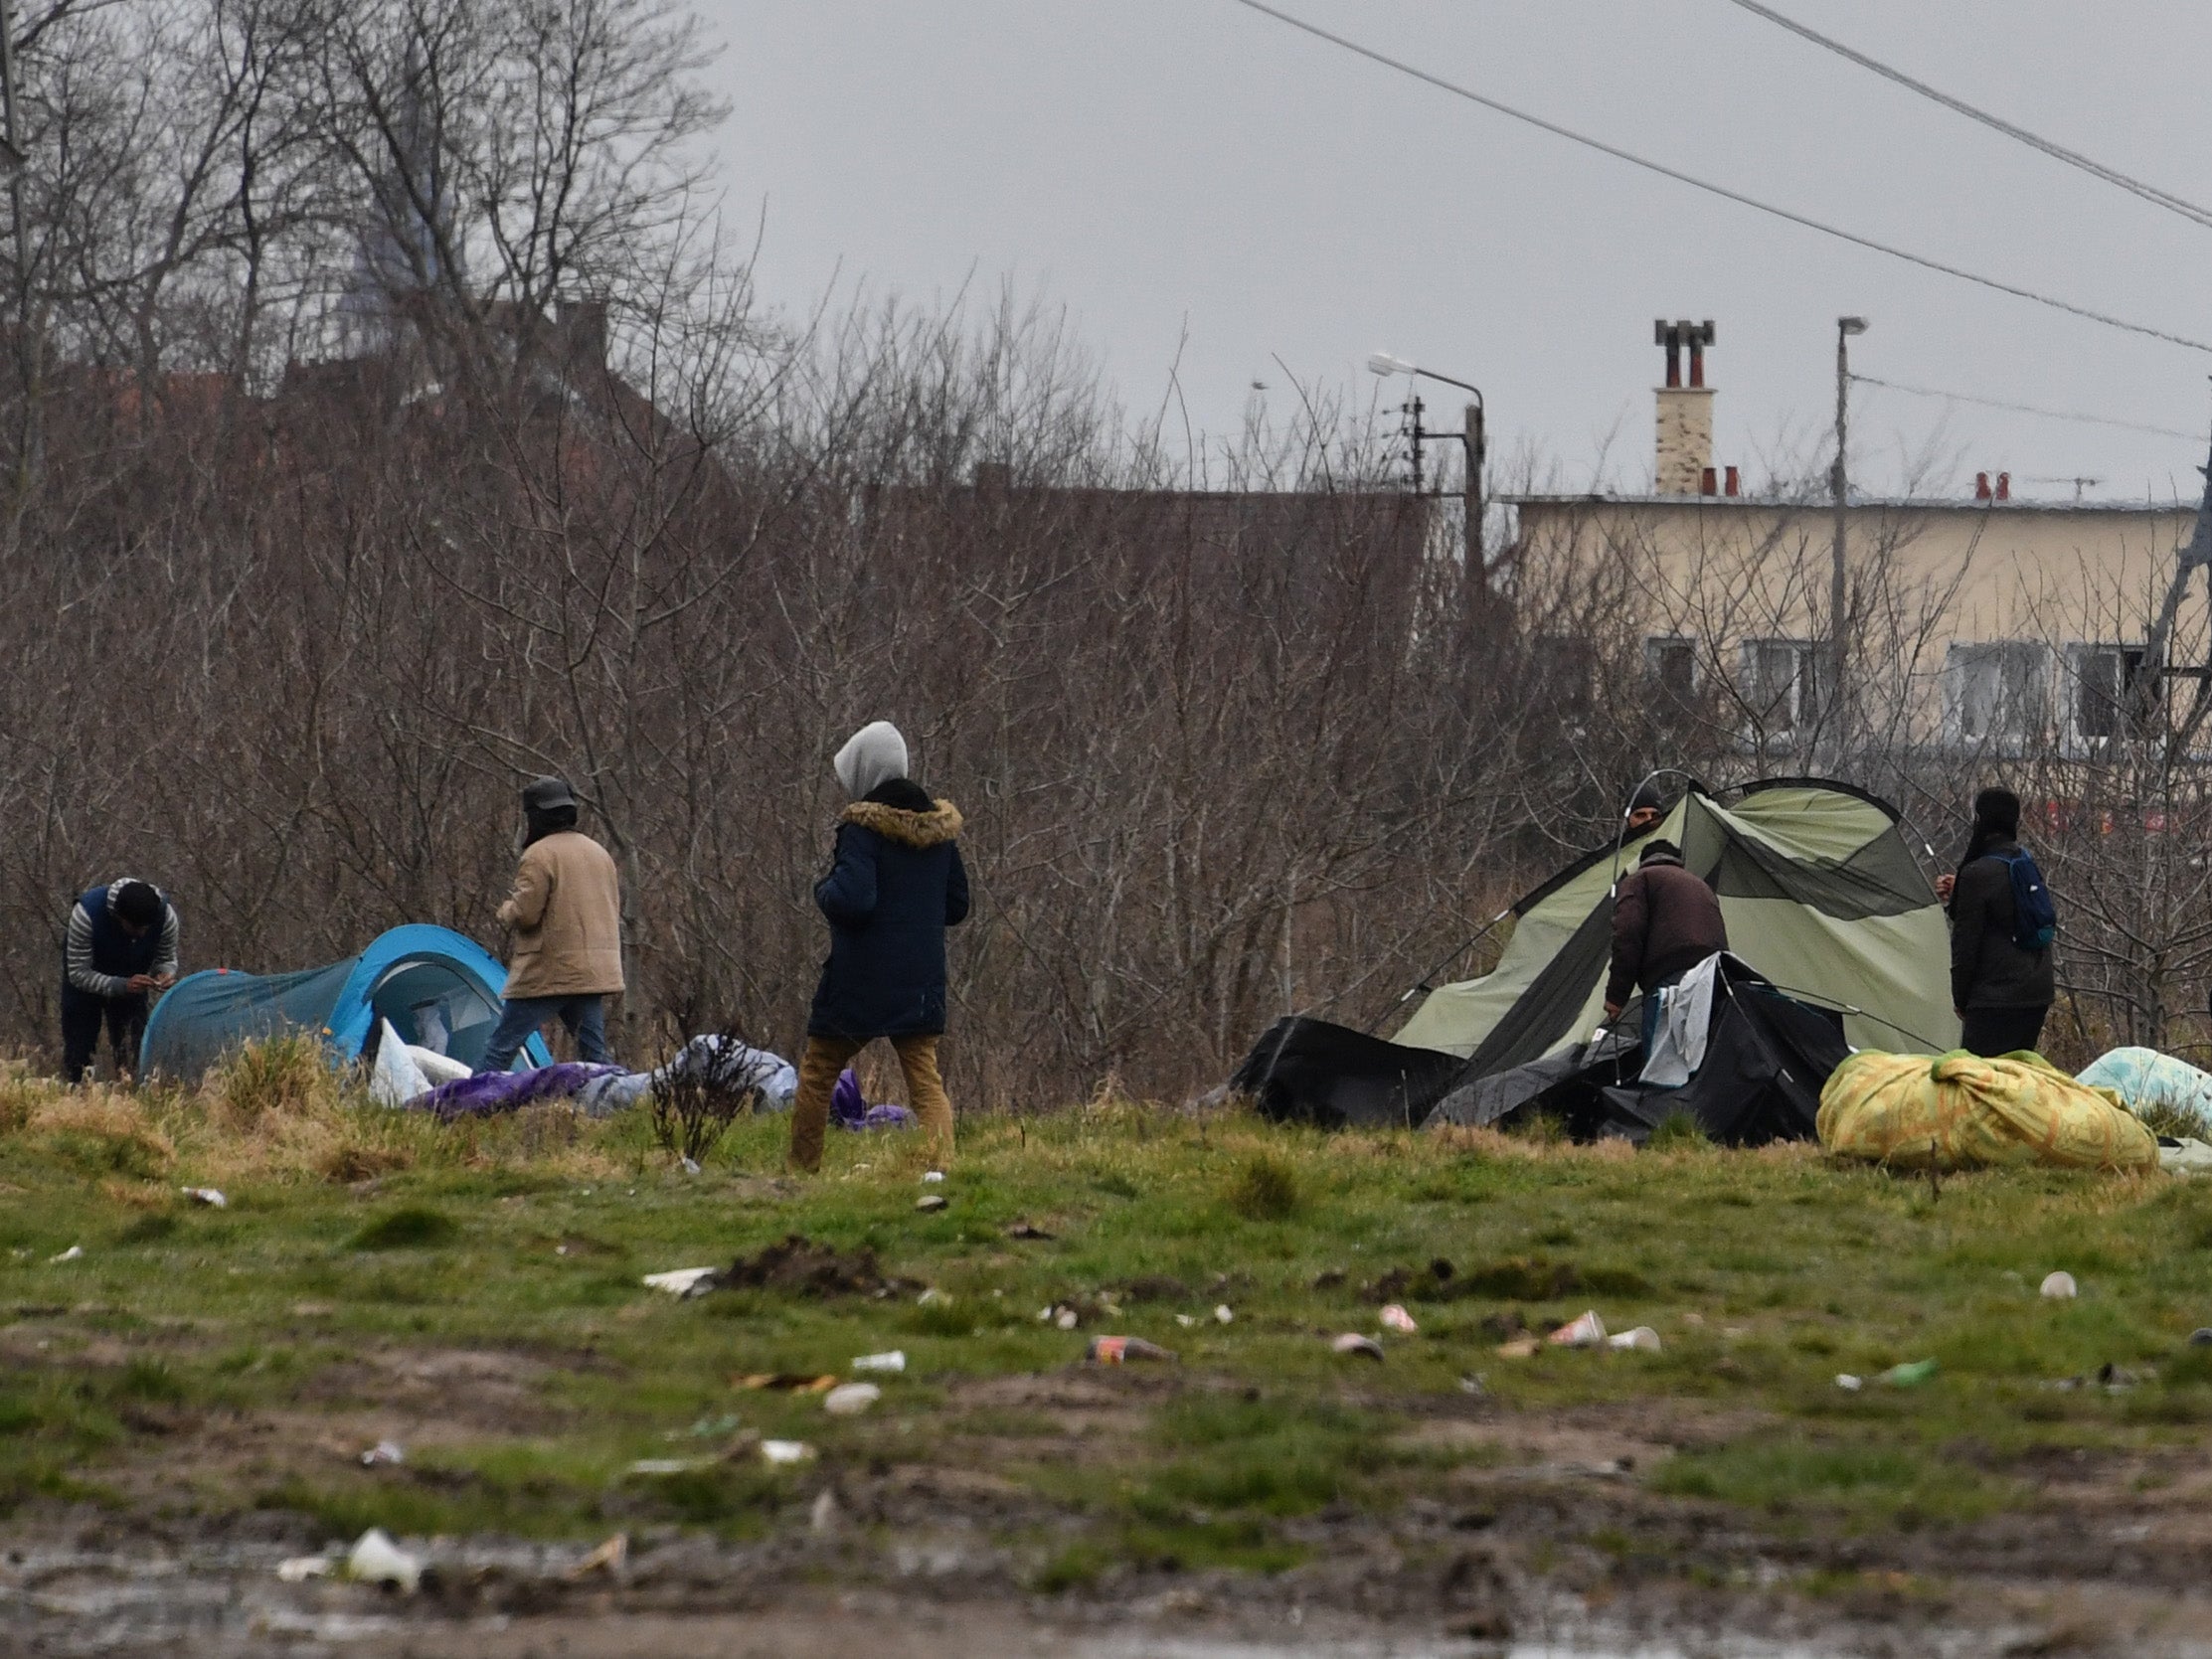 It is estimated that up to 900 migrants and asylum-seekers in Calais, 350 in Dunkirk and an unidentified number at other sites elsewhere along the northern French coast